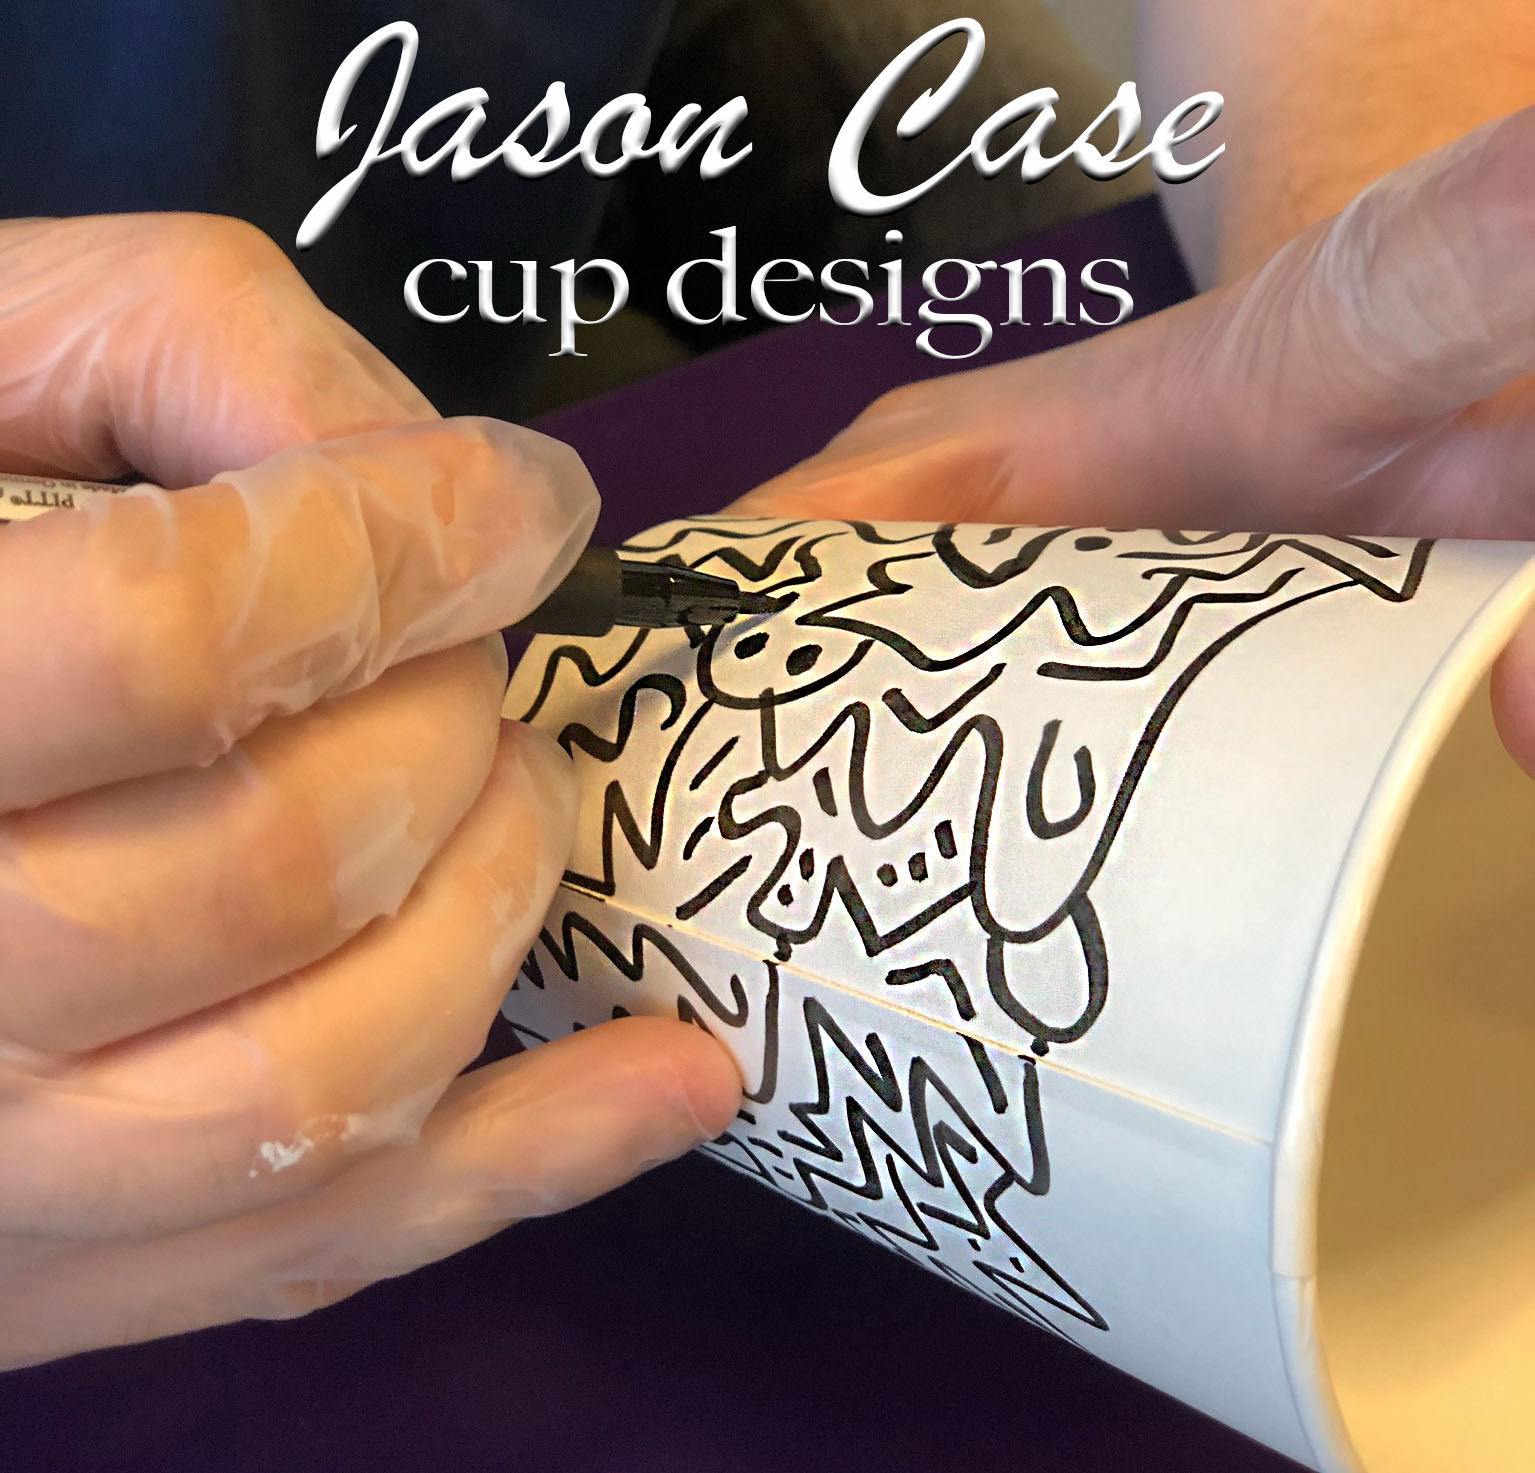 Jason Case used markers to design several cups for students to enjoy when visiting the Patio Cafe. Photo by The Signal reporter Kathryn King.